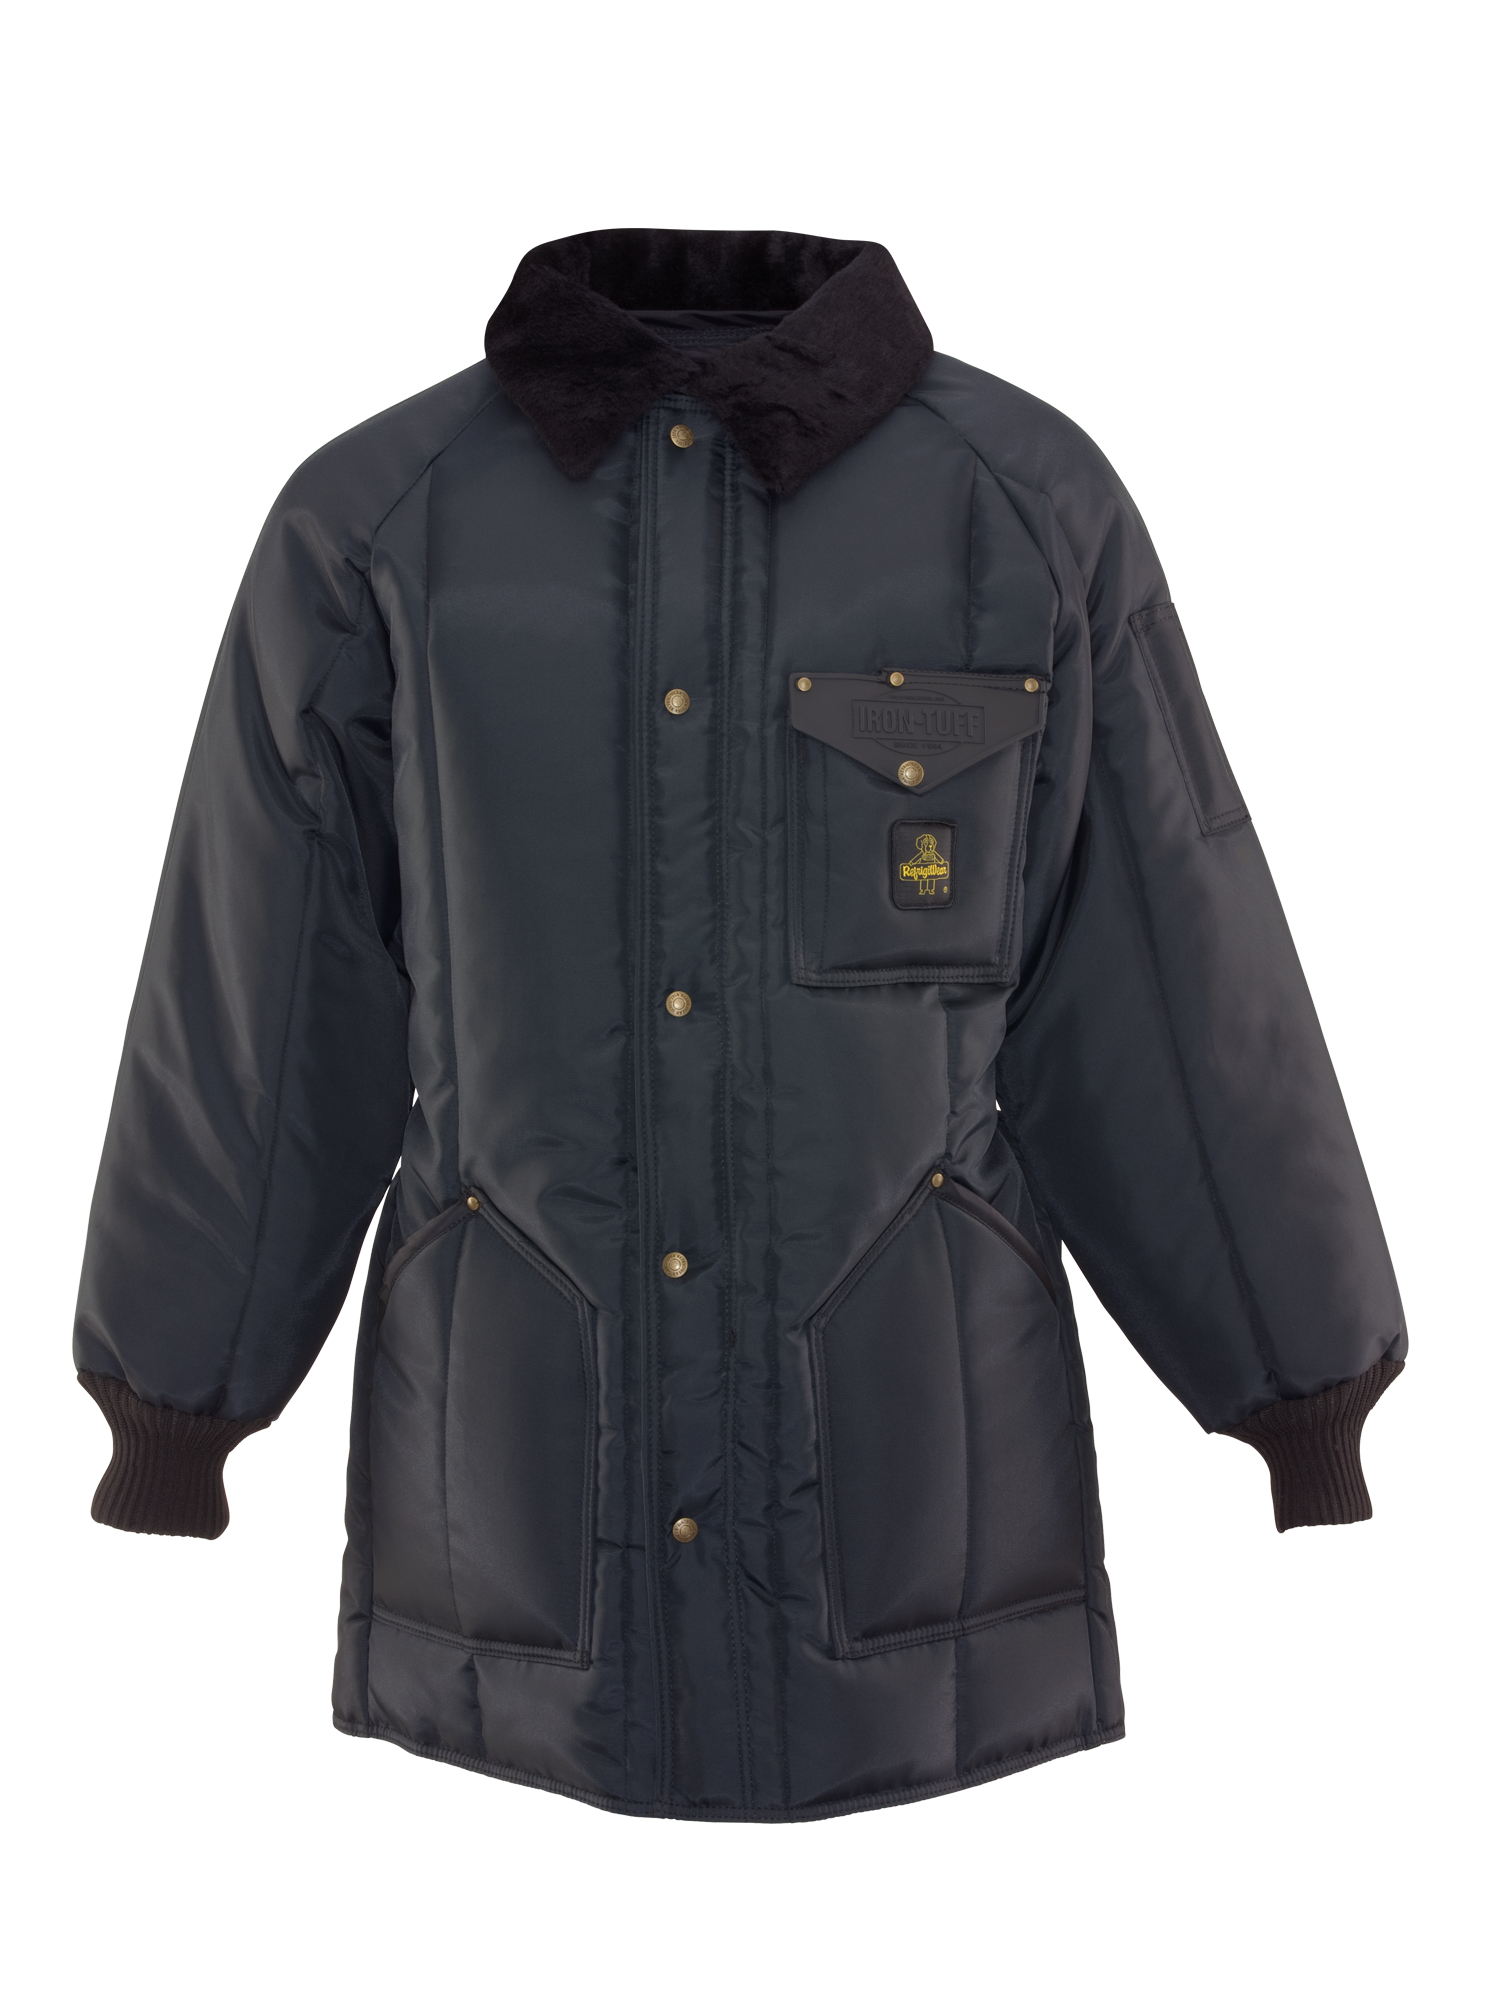 Quilted Jackets for Women and Down Jackets - RefrigiWear®